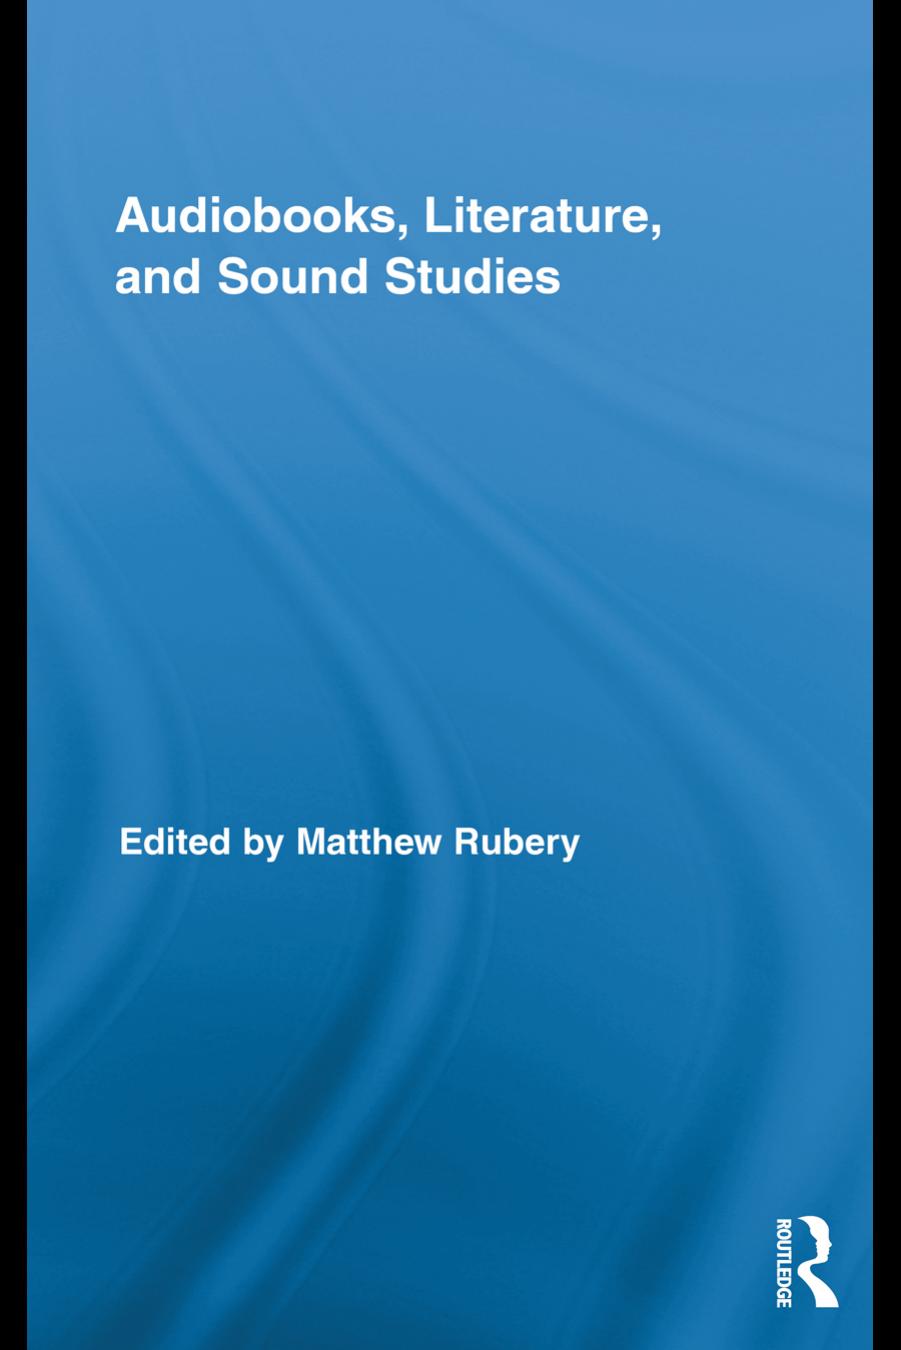 Audiobooks, Literature, and Sound Studies by Matthew Rubery (edt)